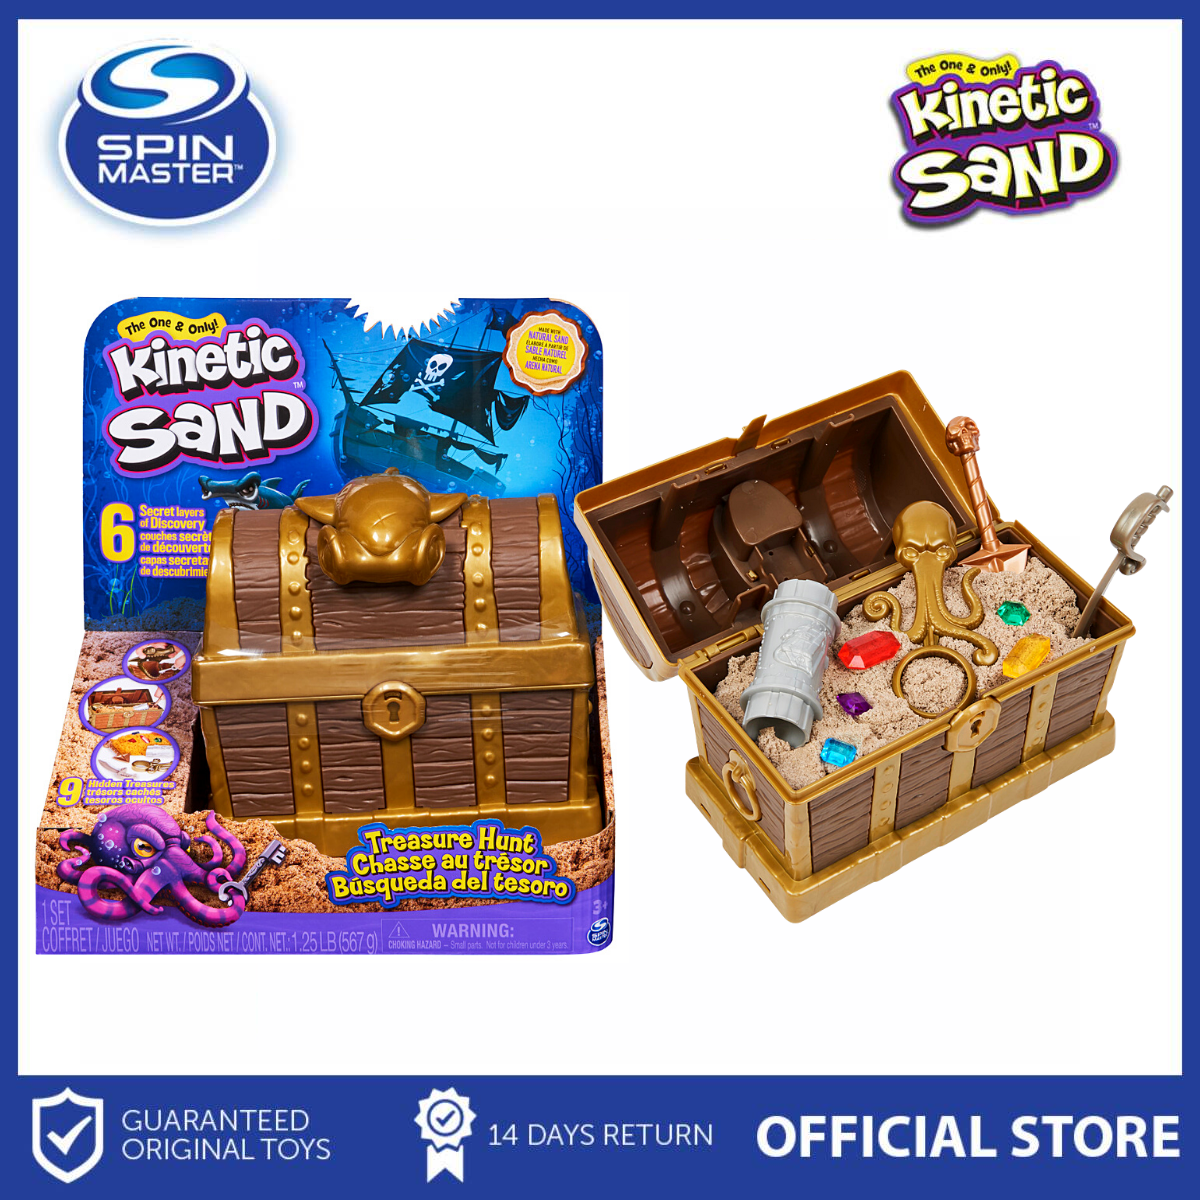 Kinetic Sand Treasure Hunt with 9 Hidden Treasures and Accessories Sand Toy  Playset Gift for Kids ages 3 years and above I Rare Gold Sand Toy